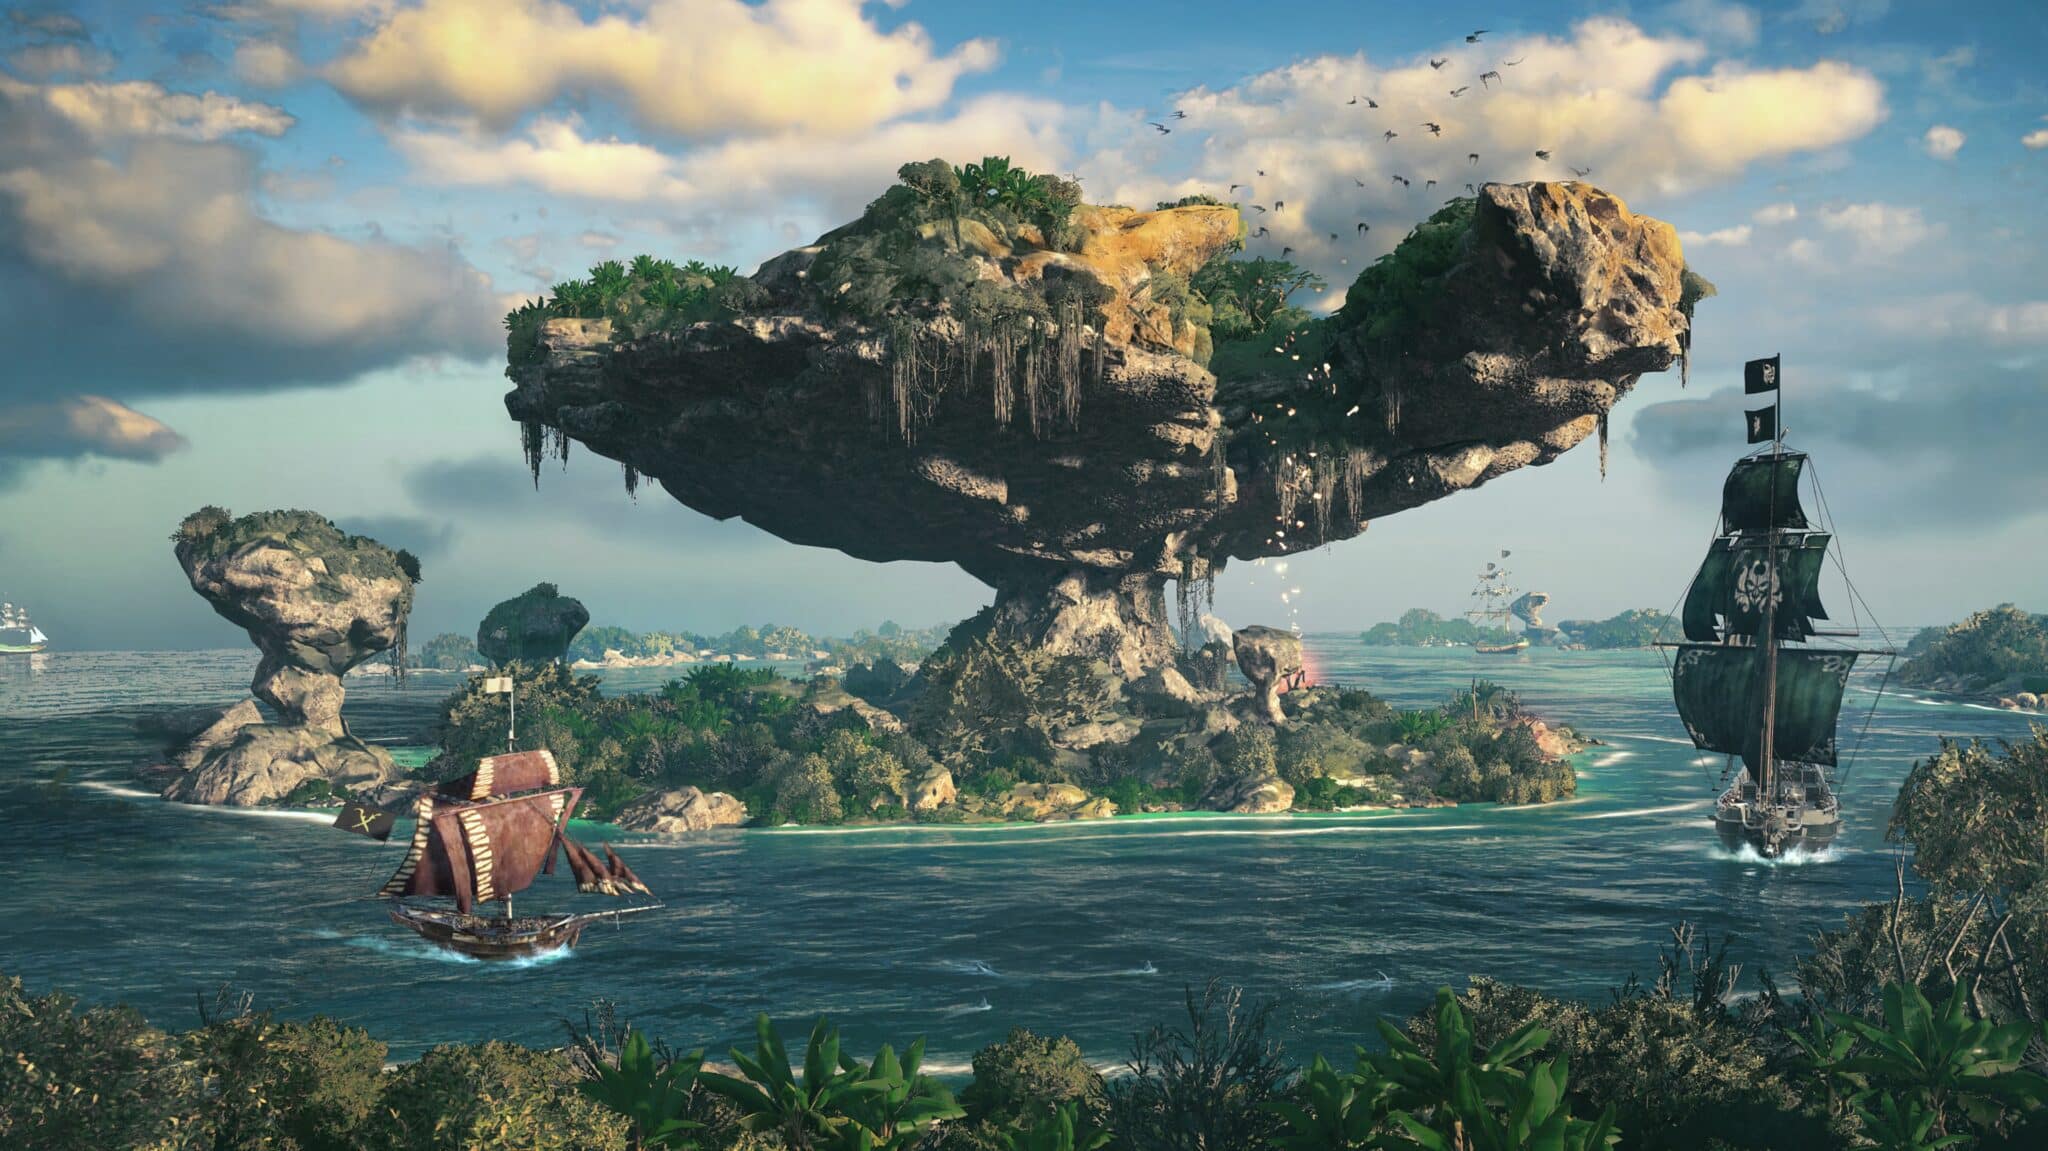 (Skull & Bones Open World is inspired by the East Indies, but also rely on rather ... Estruturas imaginativas